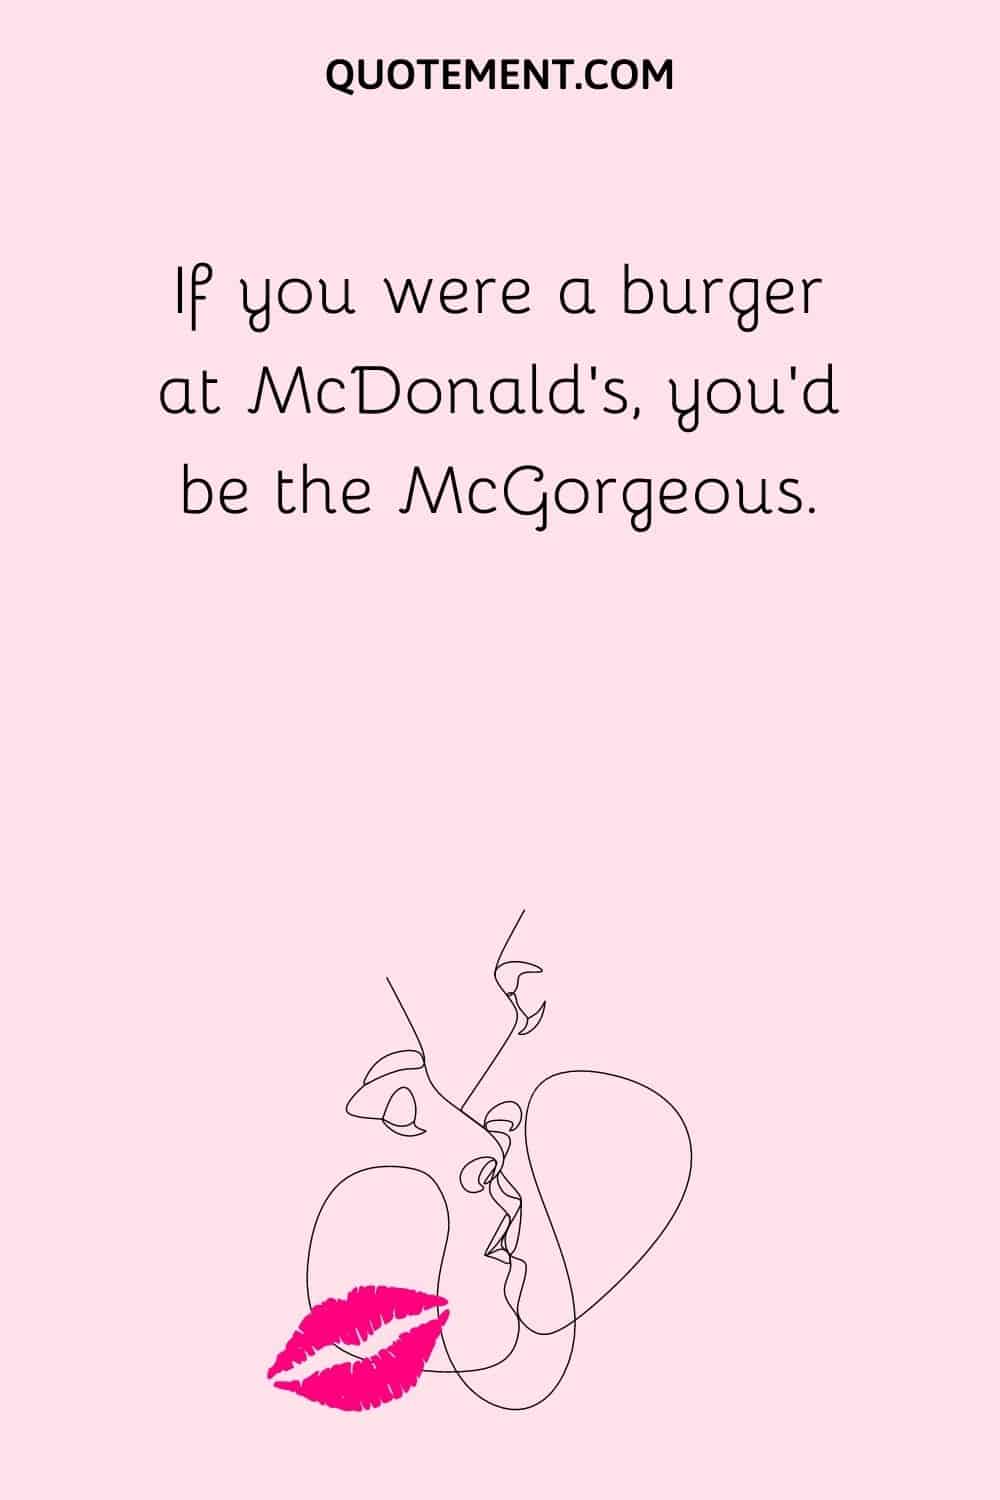 If you were a burger at McDonald’s, you’d be the McGorgeous